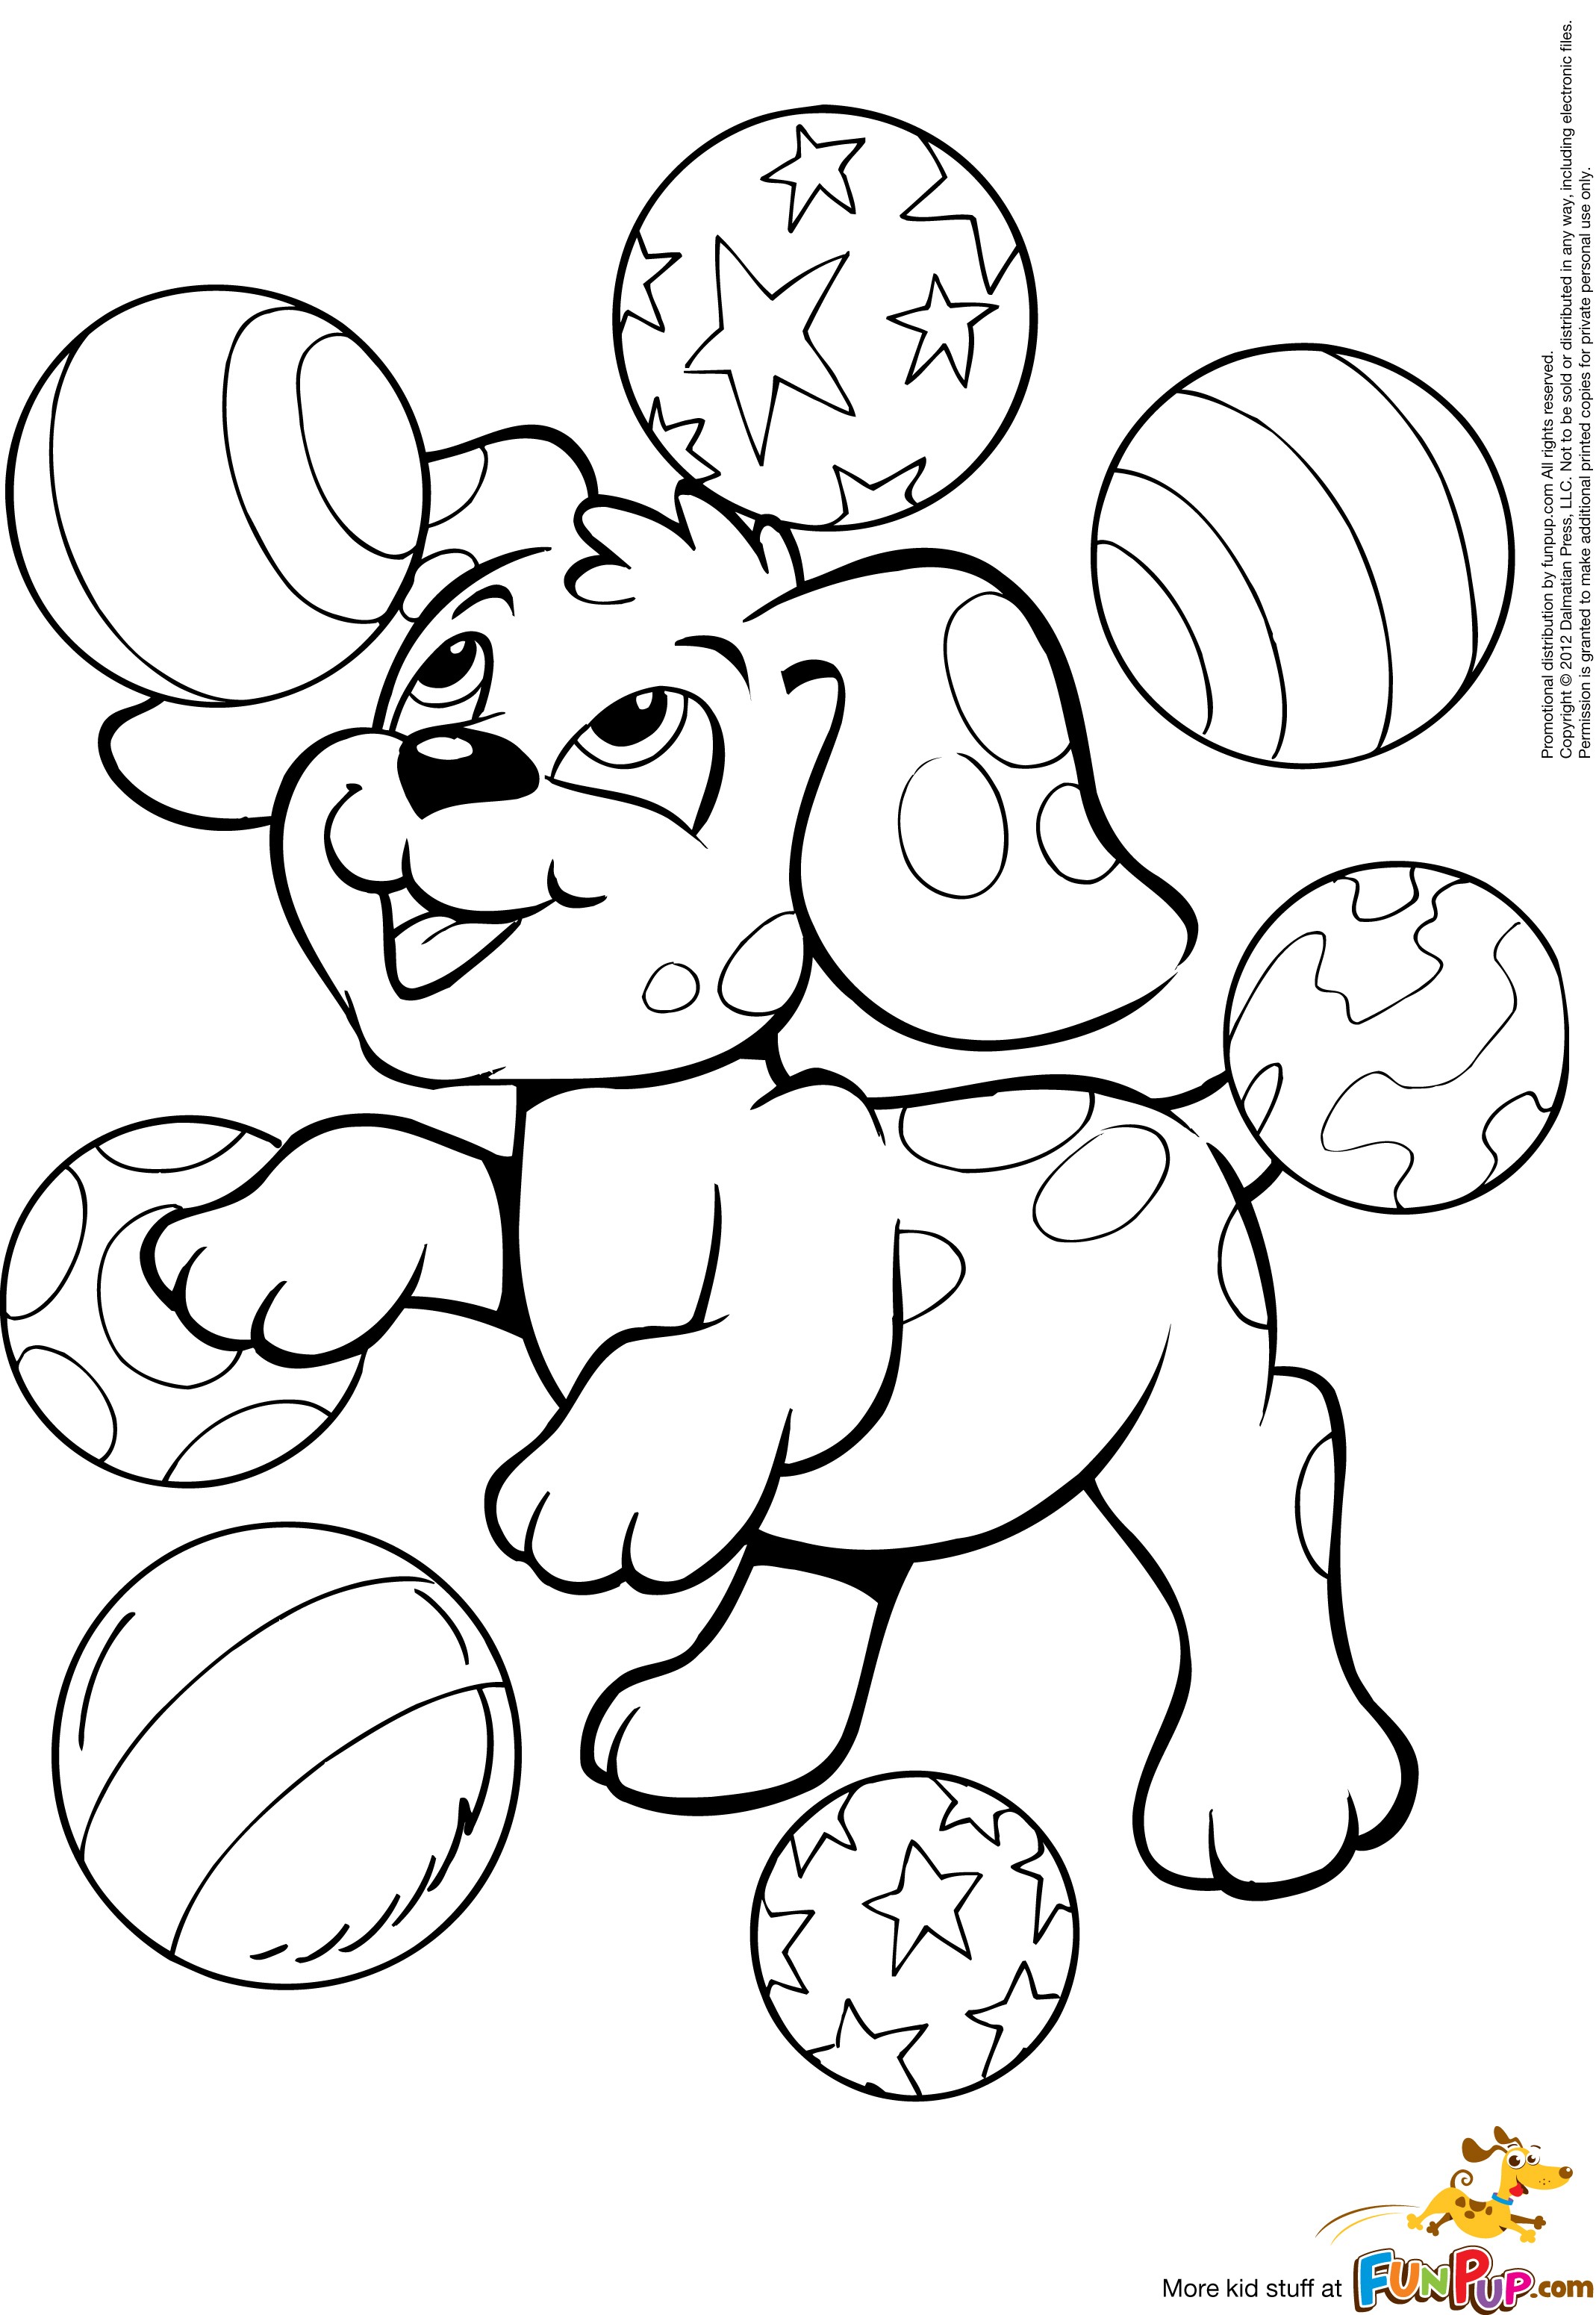 Printable Cute Puppy Coloring Pages at GetDrawings Free download